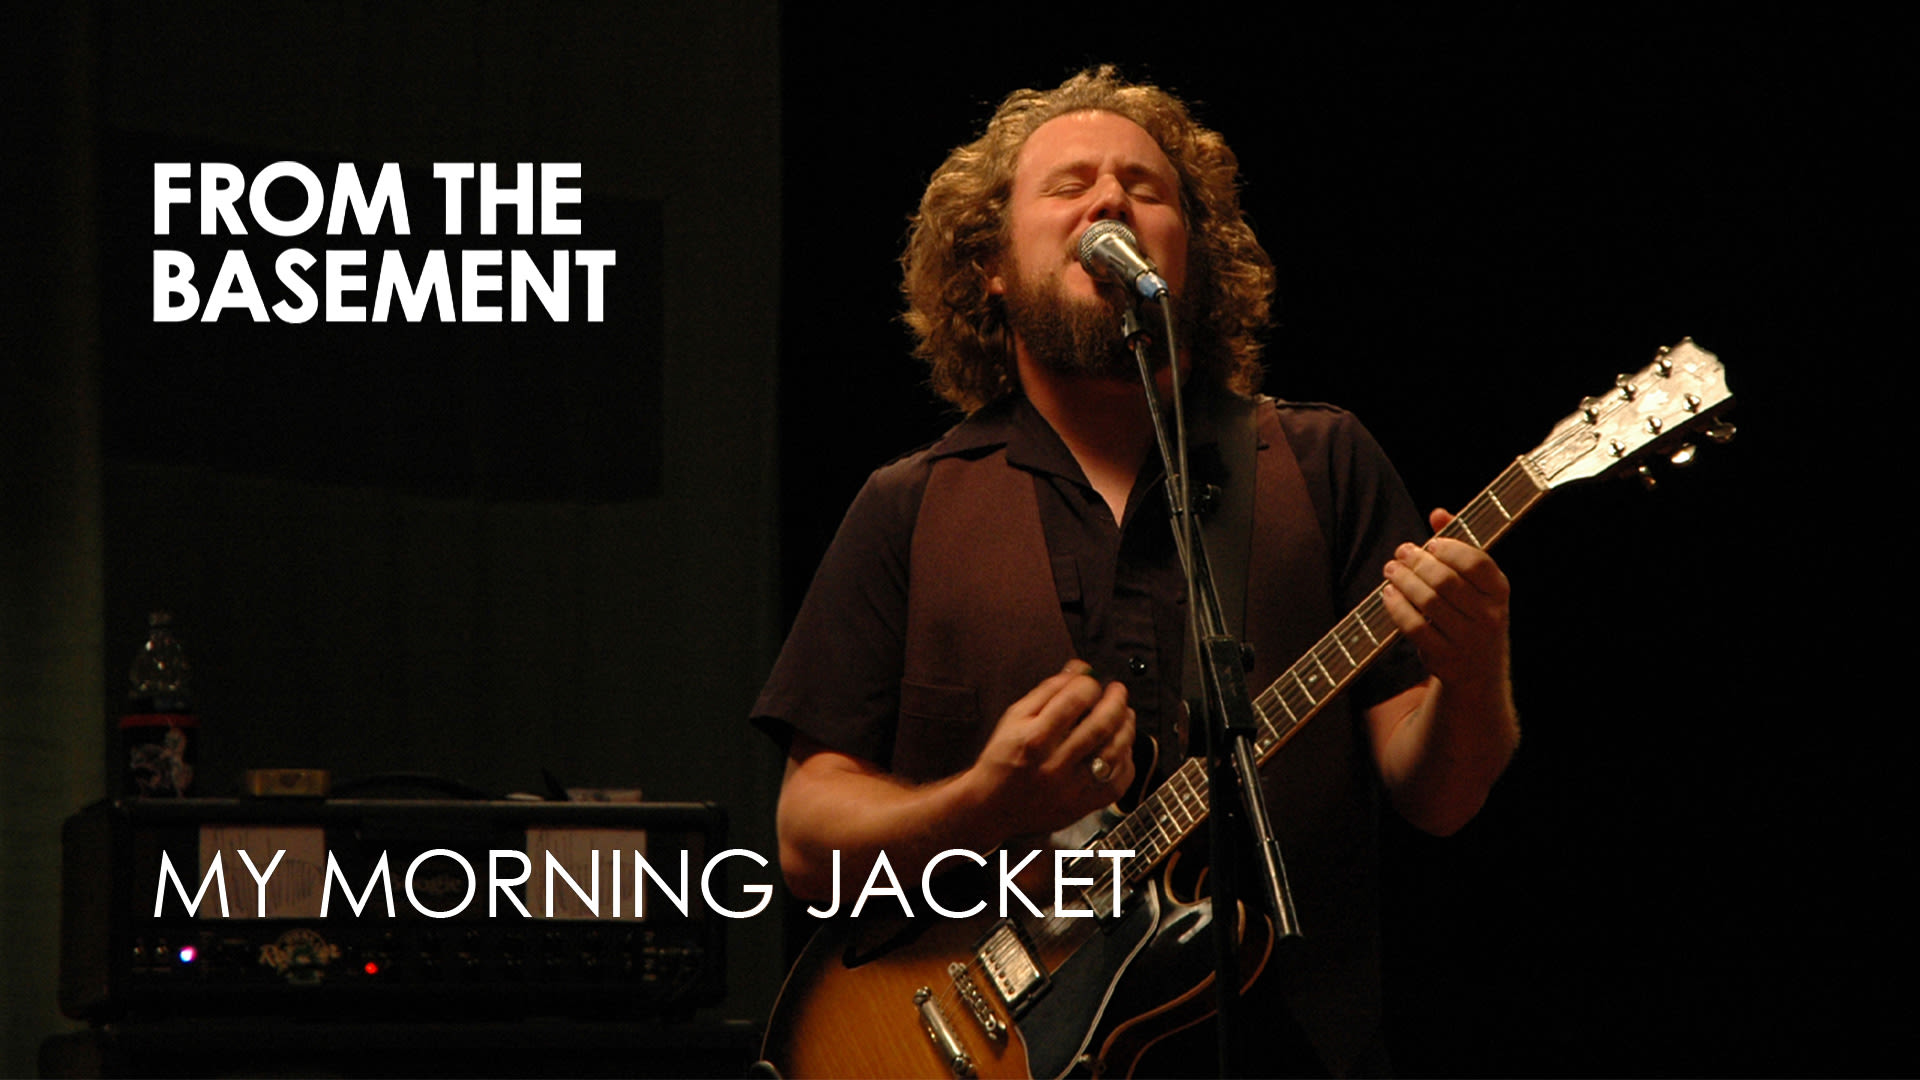 My Morning Jacket - From the Basement